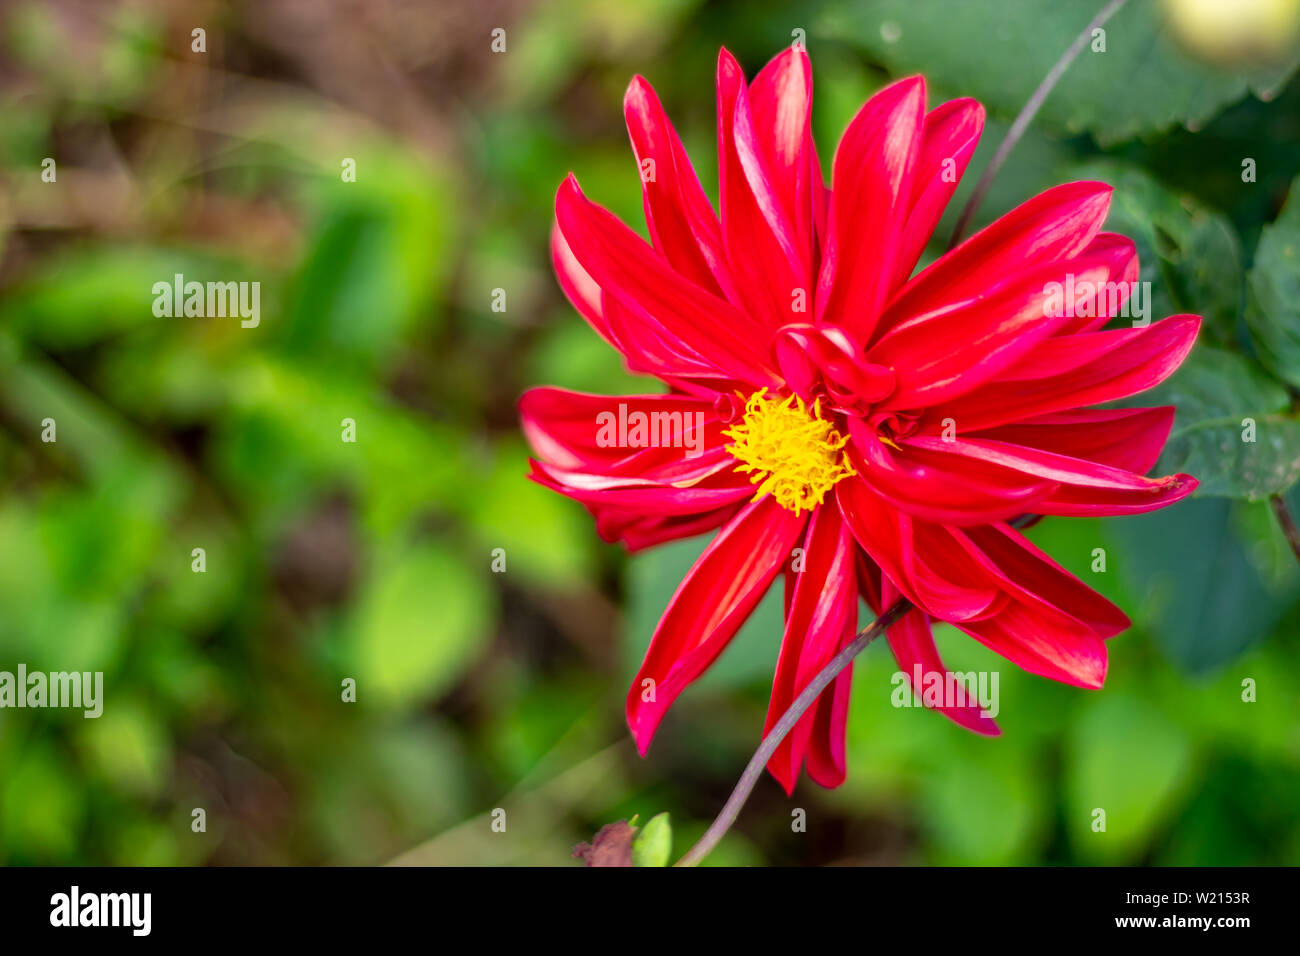 Red flowers with yellow stamens green background. Stock Photo